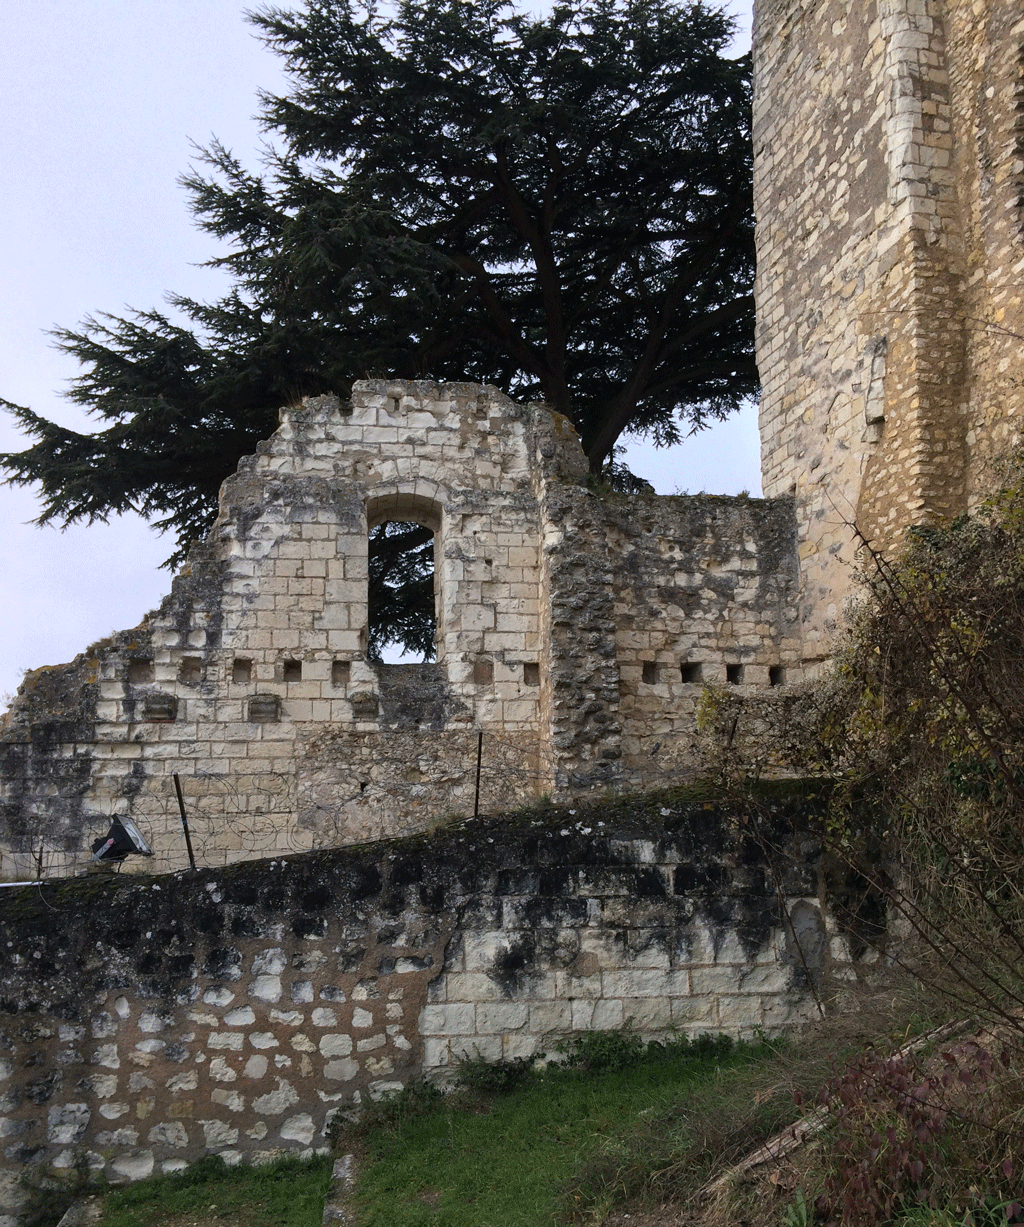 The ruins of Montrichard castle